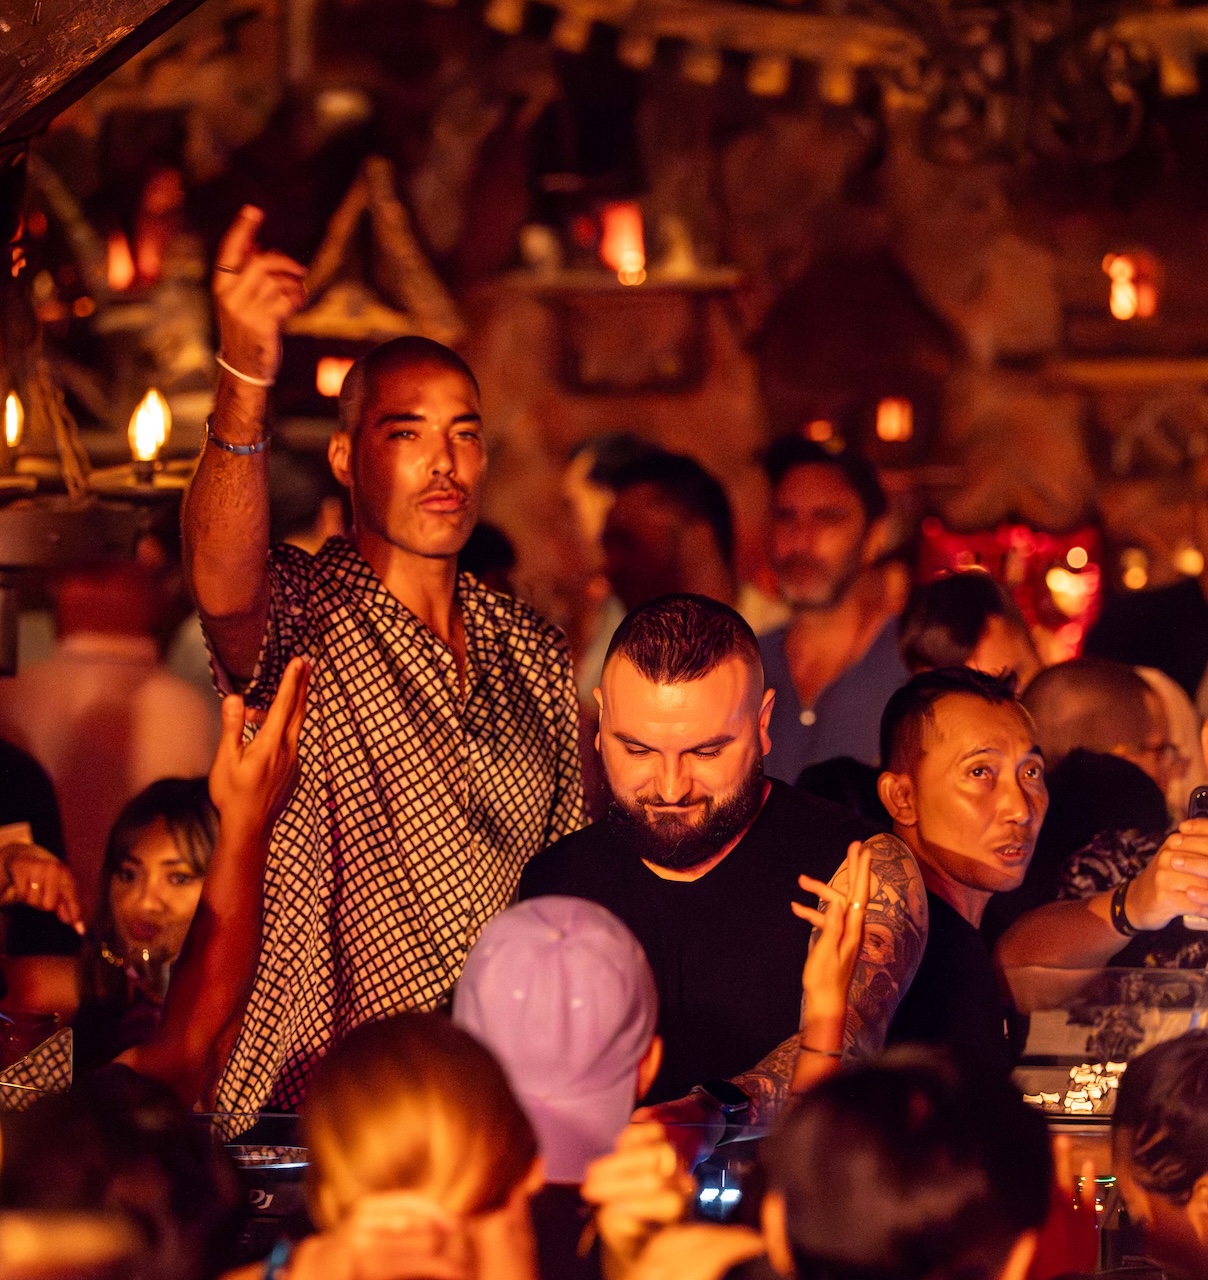 Ground-breaking nightlife venue Iron Fairies has opened an enchanting new flagship outlet at the heart of Bali's Seminyak neighbourhood. 